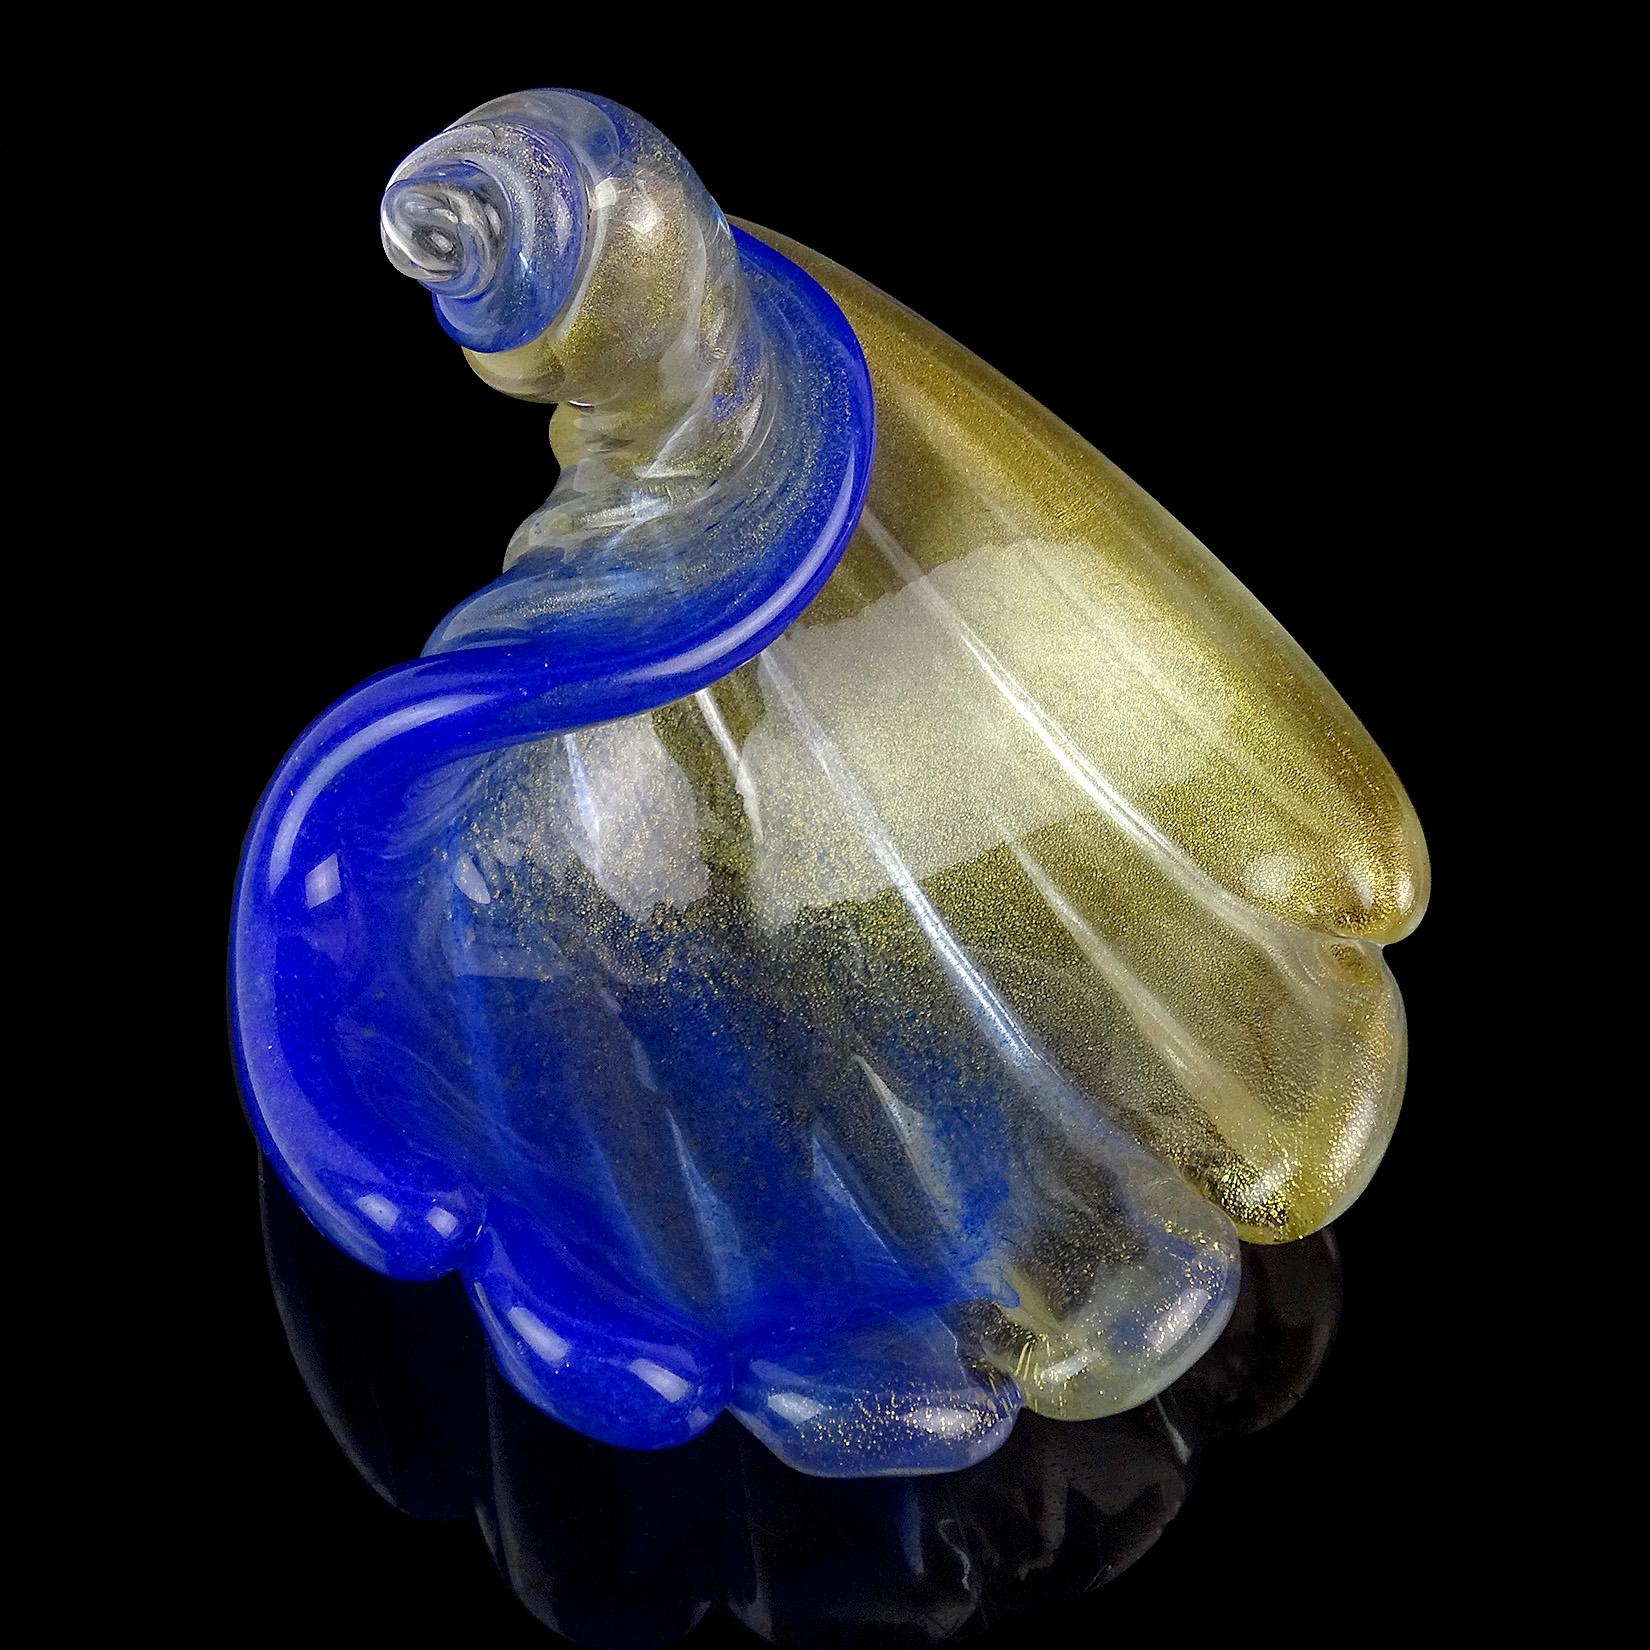 Beautiful vintage Murano hand blown cobalt blue pigments and gold flecks Italian art glass seashell dish, bowl or sculpture. Documented to designer Archimede Seguso. Created in the 